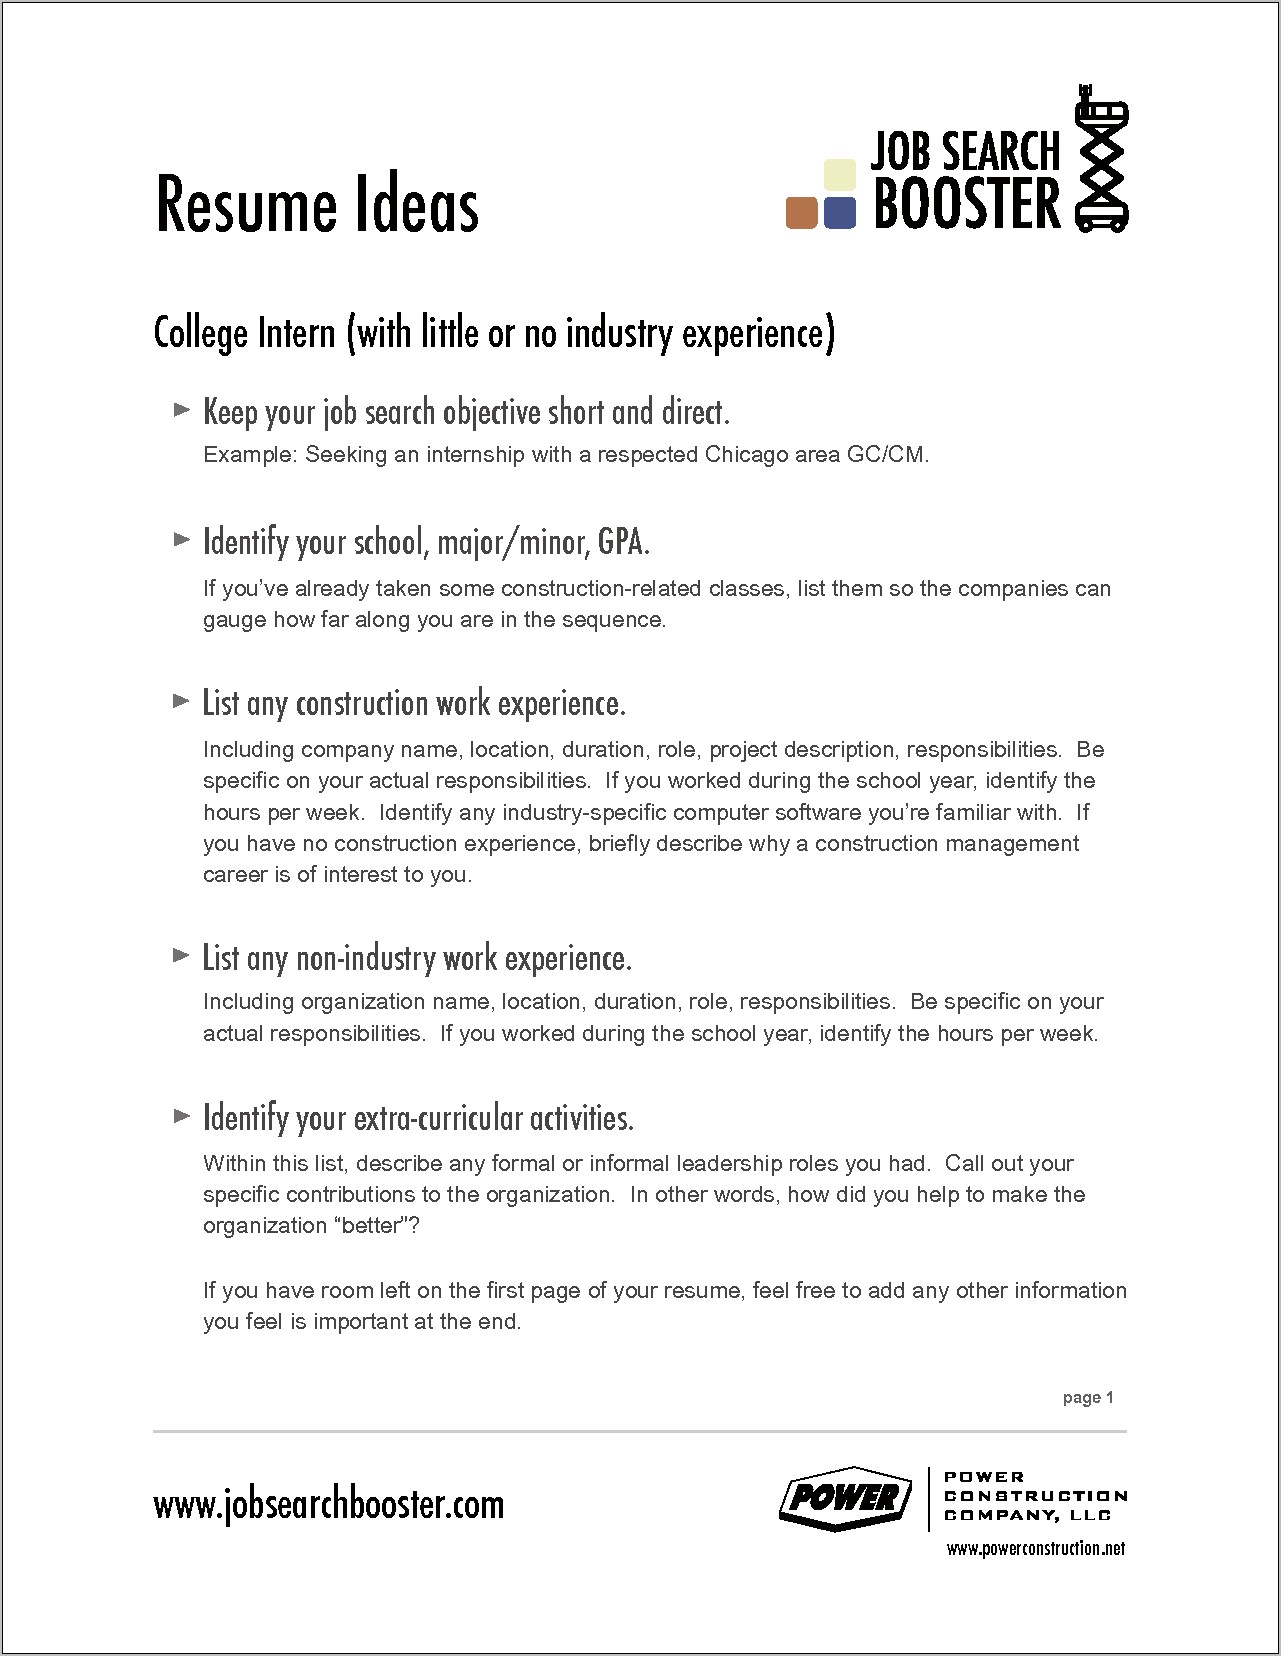 General Retail Resume Objective Examples